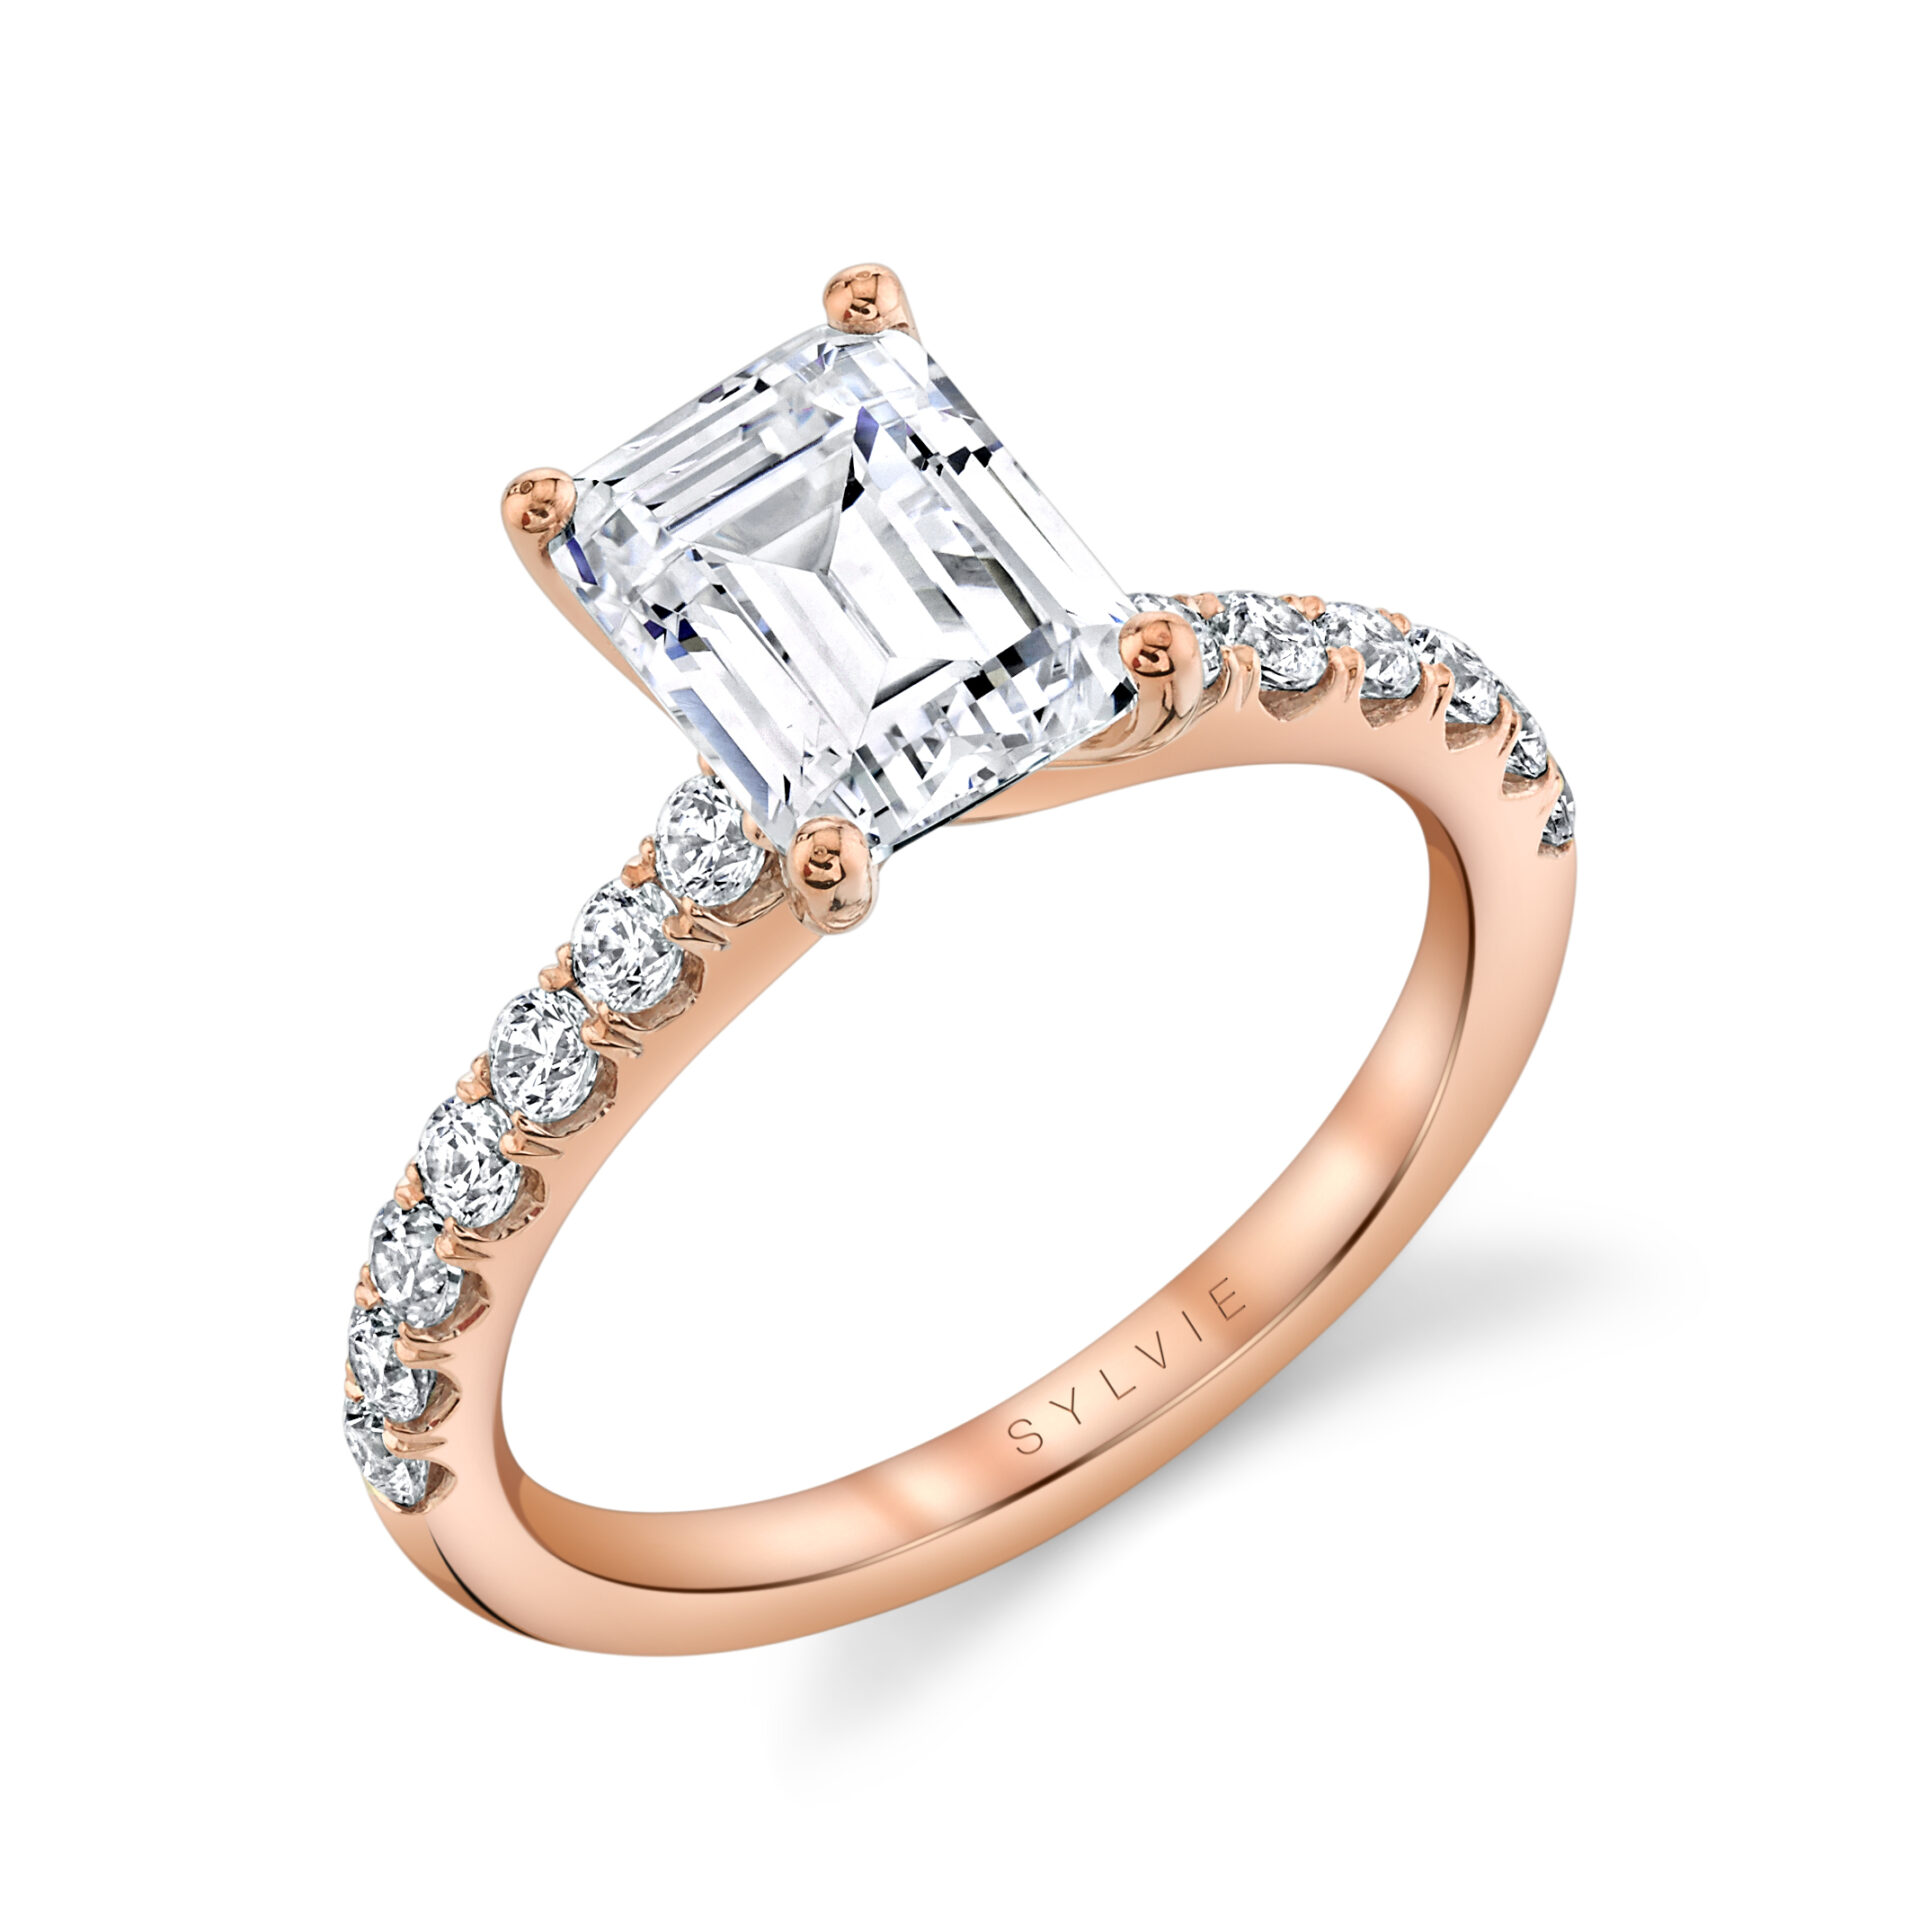 Emerald Cut Classic Engagement Ring - Aimee - Sylvie Jewelry